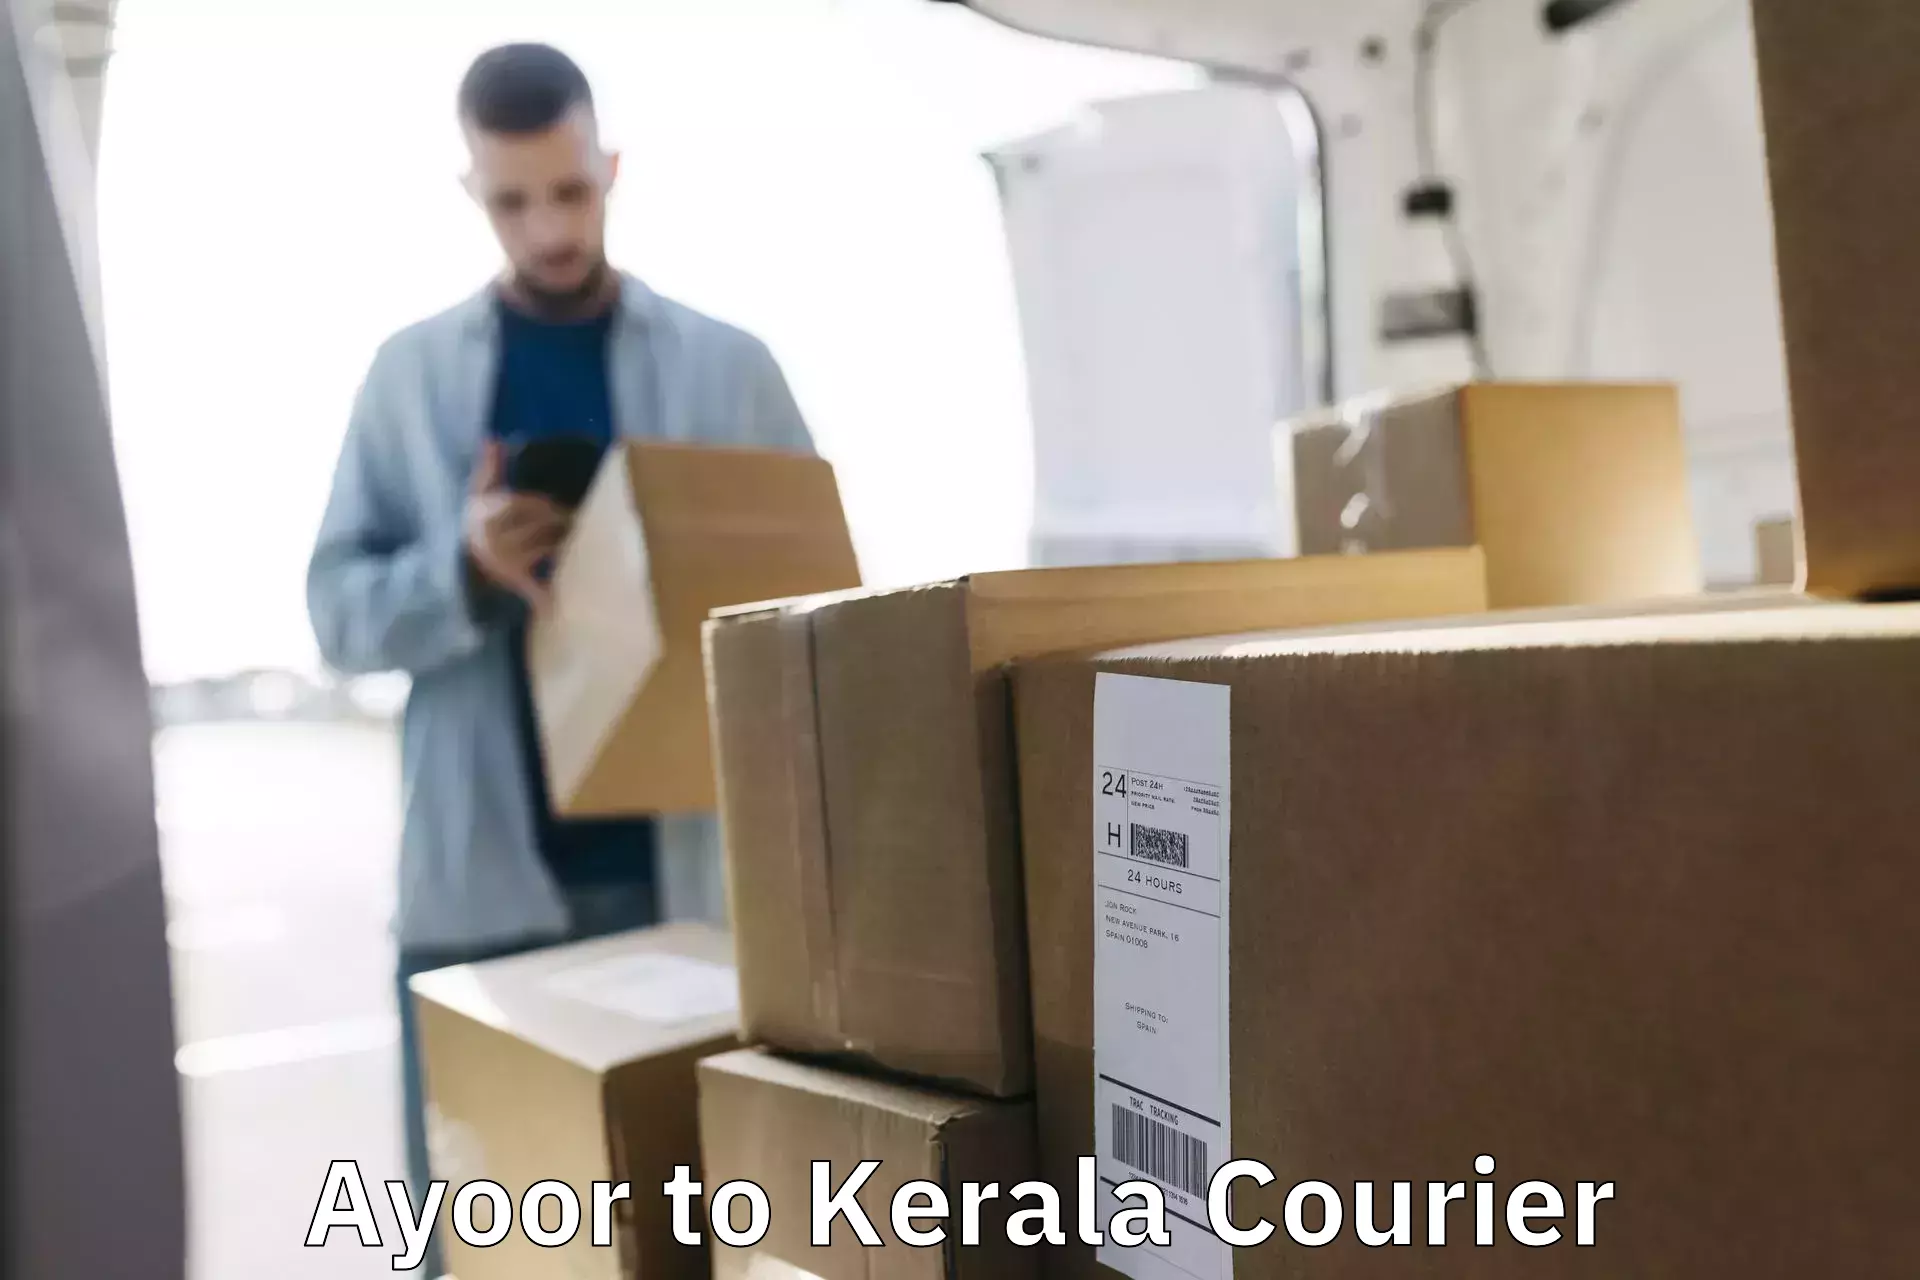 Global shipping networks Ayoor to Alappuzha